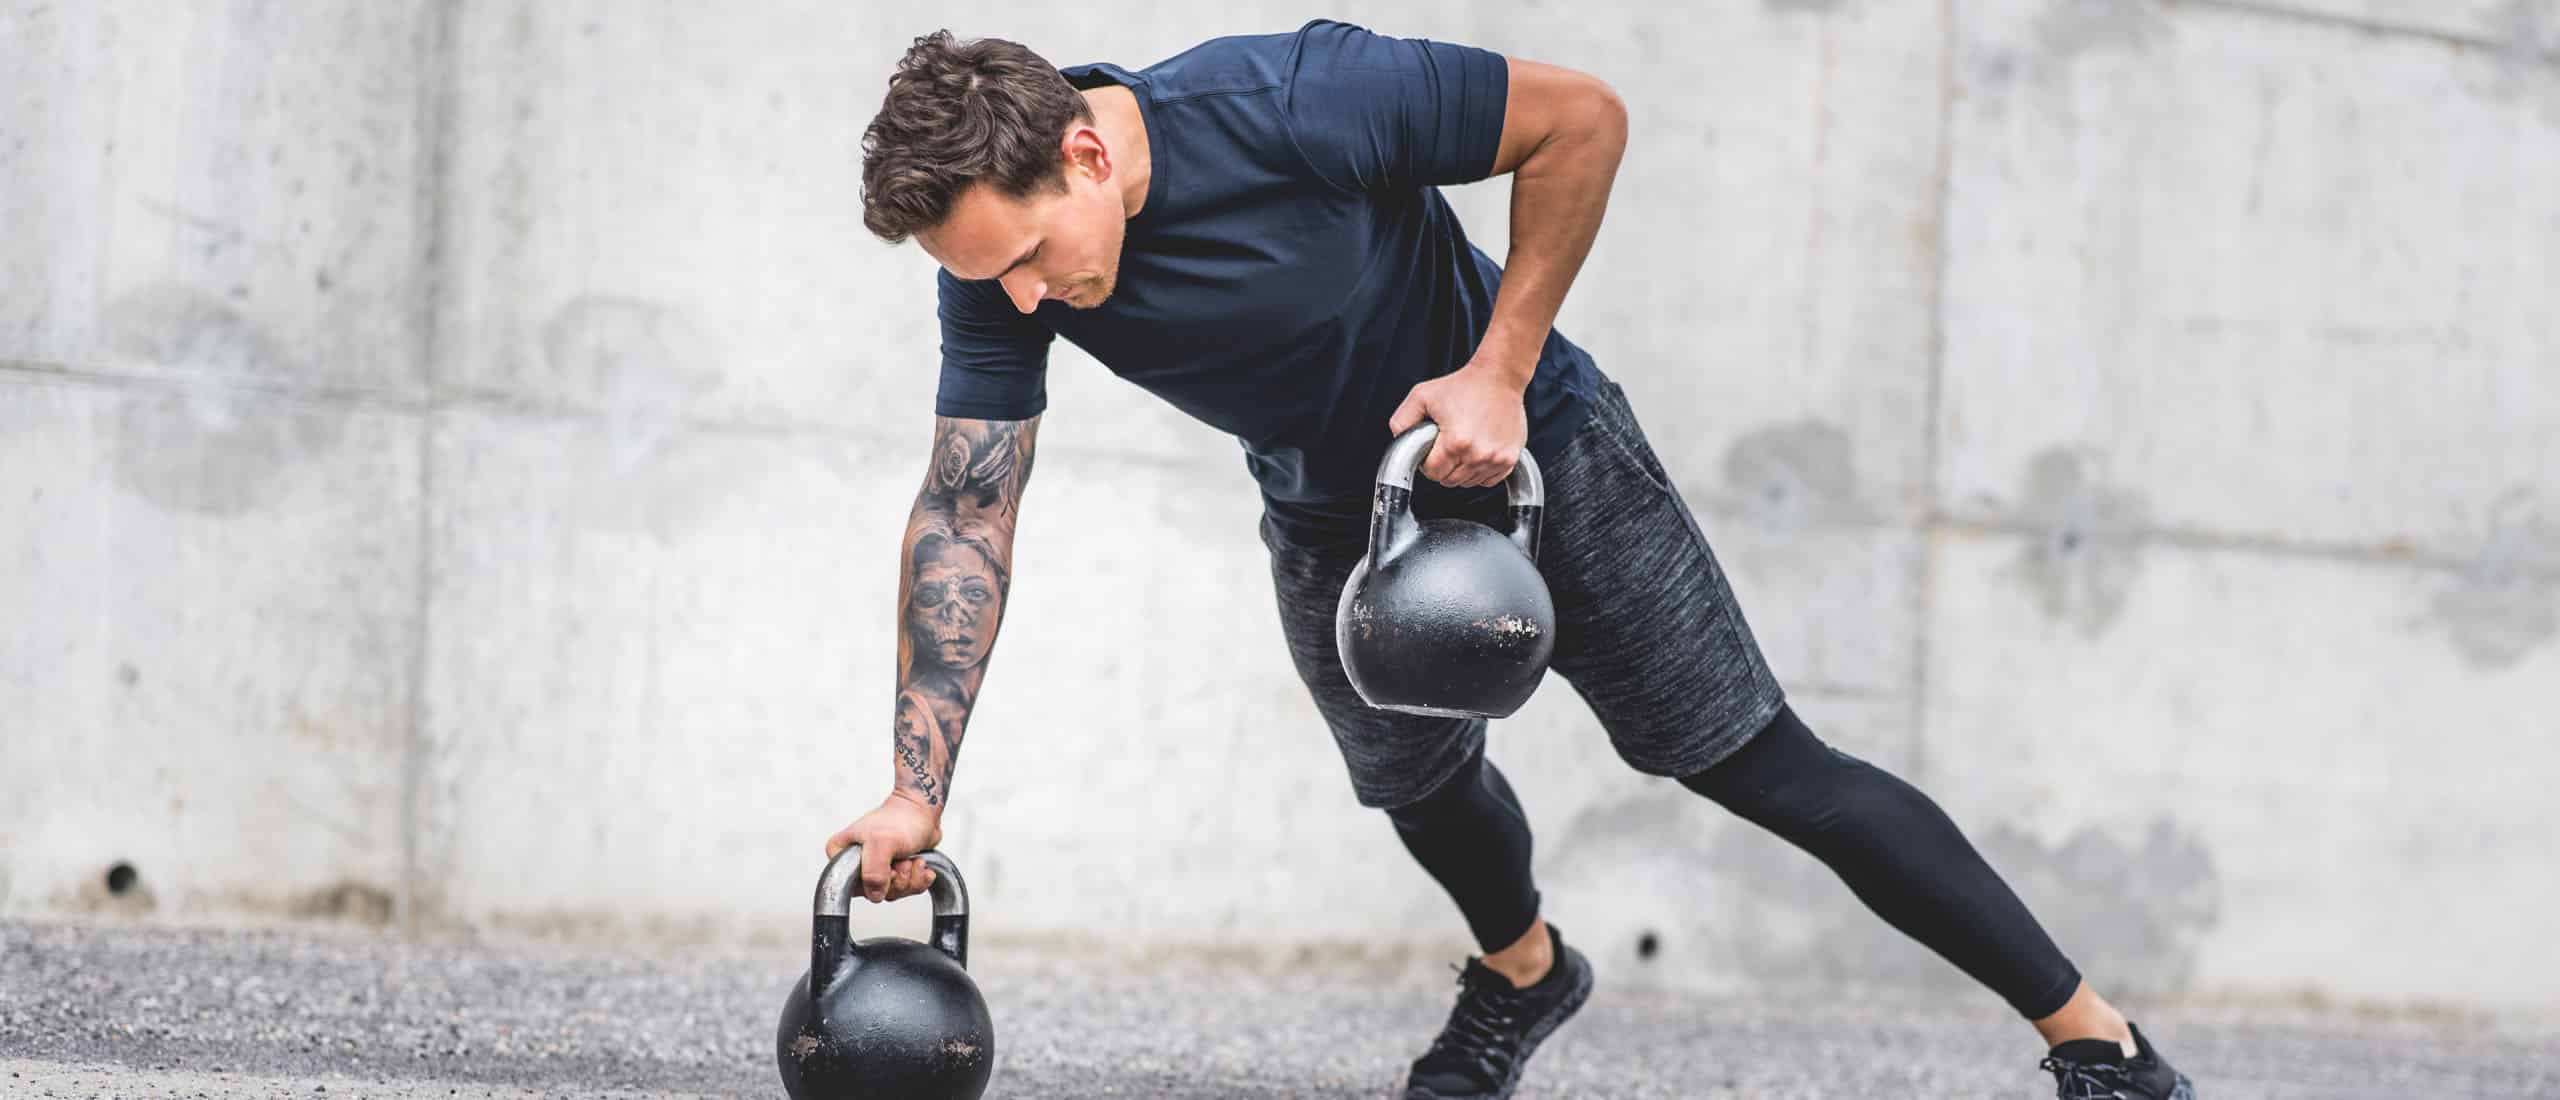 Man doing exercise with kettlebells